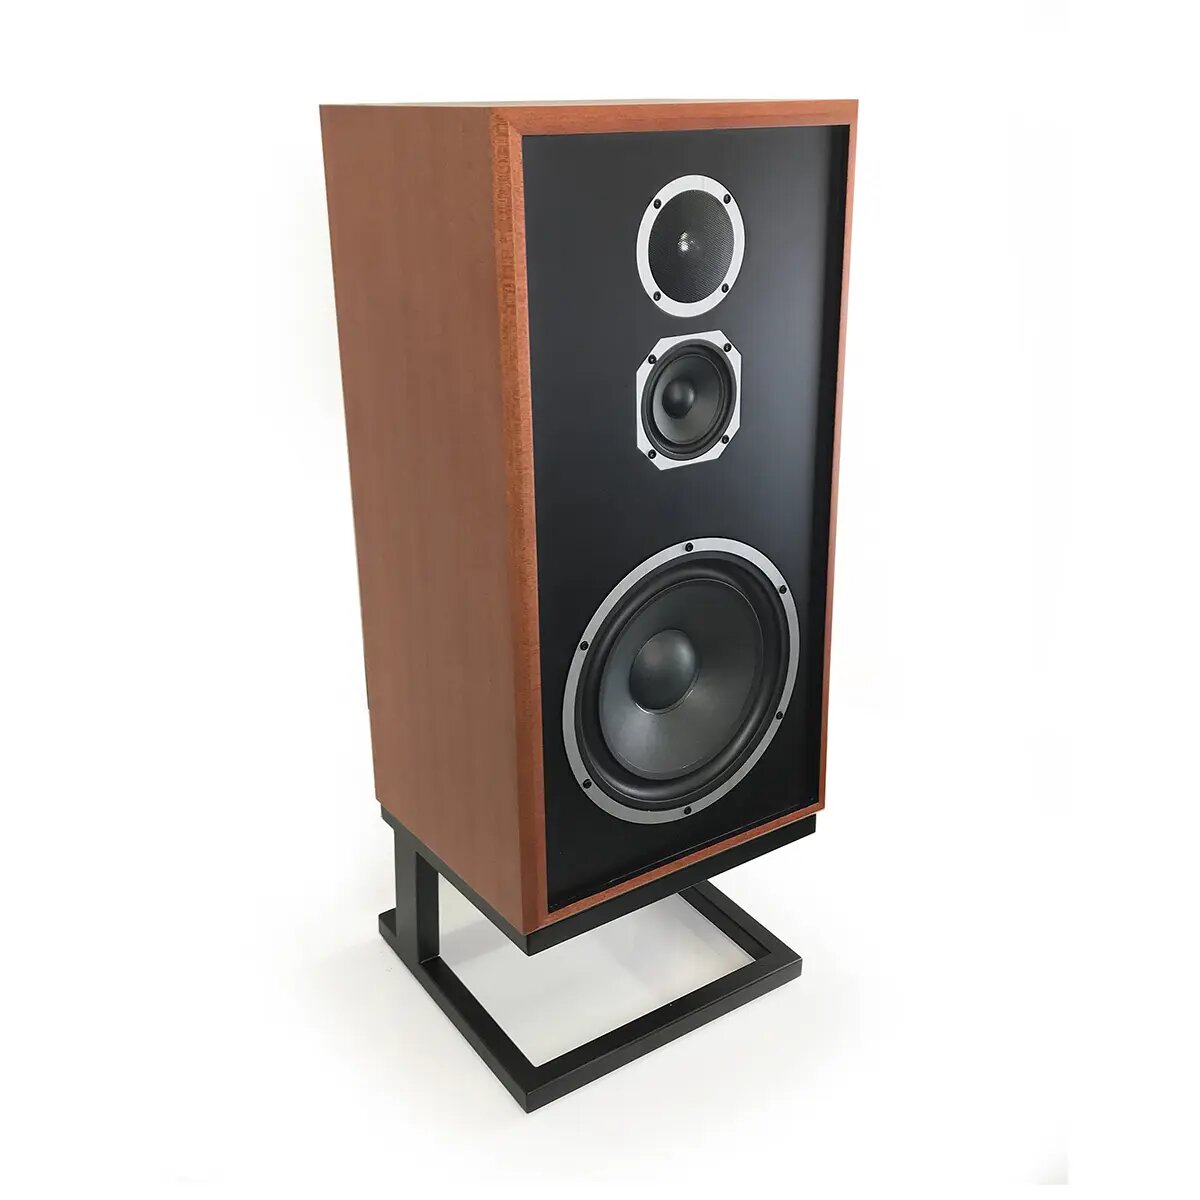 KLH MODEL 5 SPEAKERS - KLH Audio is an American audio electronics brand for high quality audio speakers, Home Audio Systems, Headphones. Check out all the KLH Audio models at Vinyl Sound: Home Theater Systems, Floorstanding Speakers, Bookshelf Speakers, The KLH Model Five Floorstanding, KLH Faraday series, KLH Maxwell series, KLH Ulimate One Zebra,The KLH Model Five vintage speaker, Bookshelf Speakers and more...